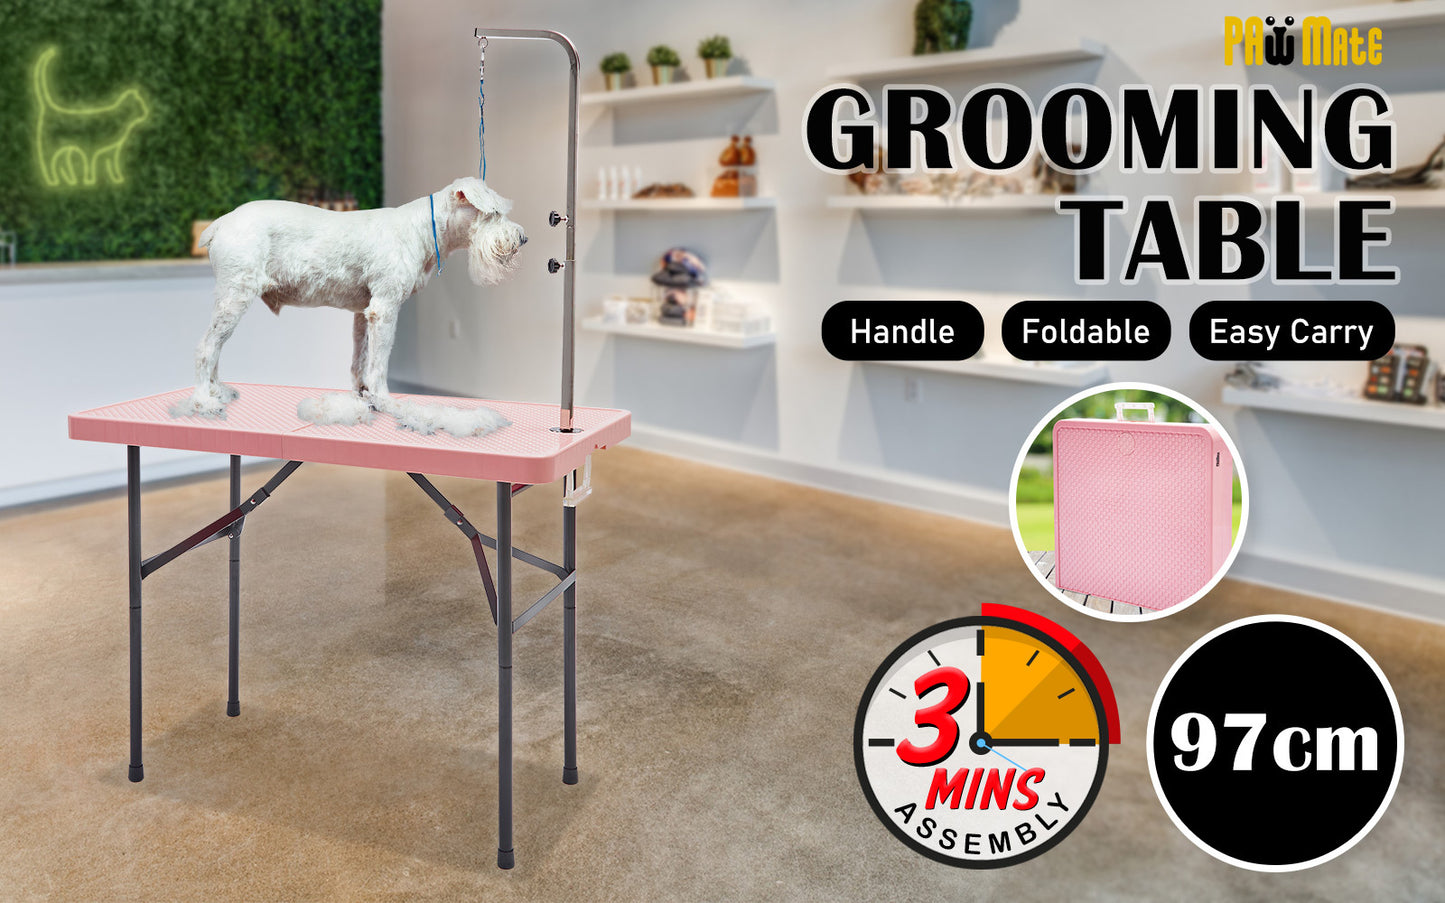 Paw Mat 97cm Pink Dog Cat Pet Grooming Salon Table Foldable Carry Height Adjustable - image2